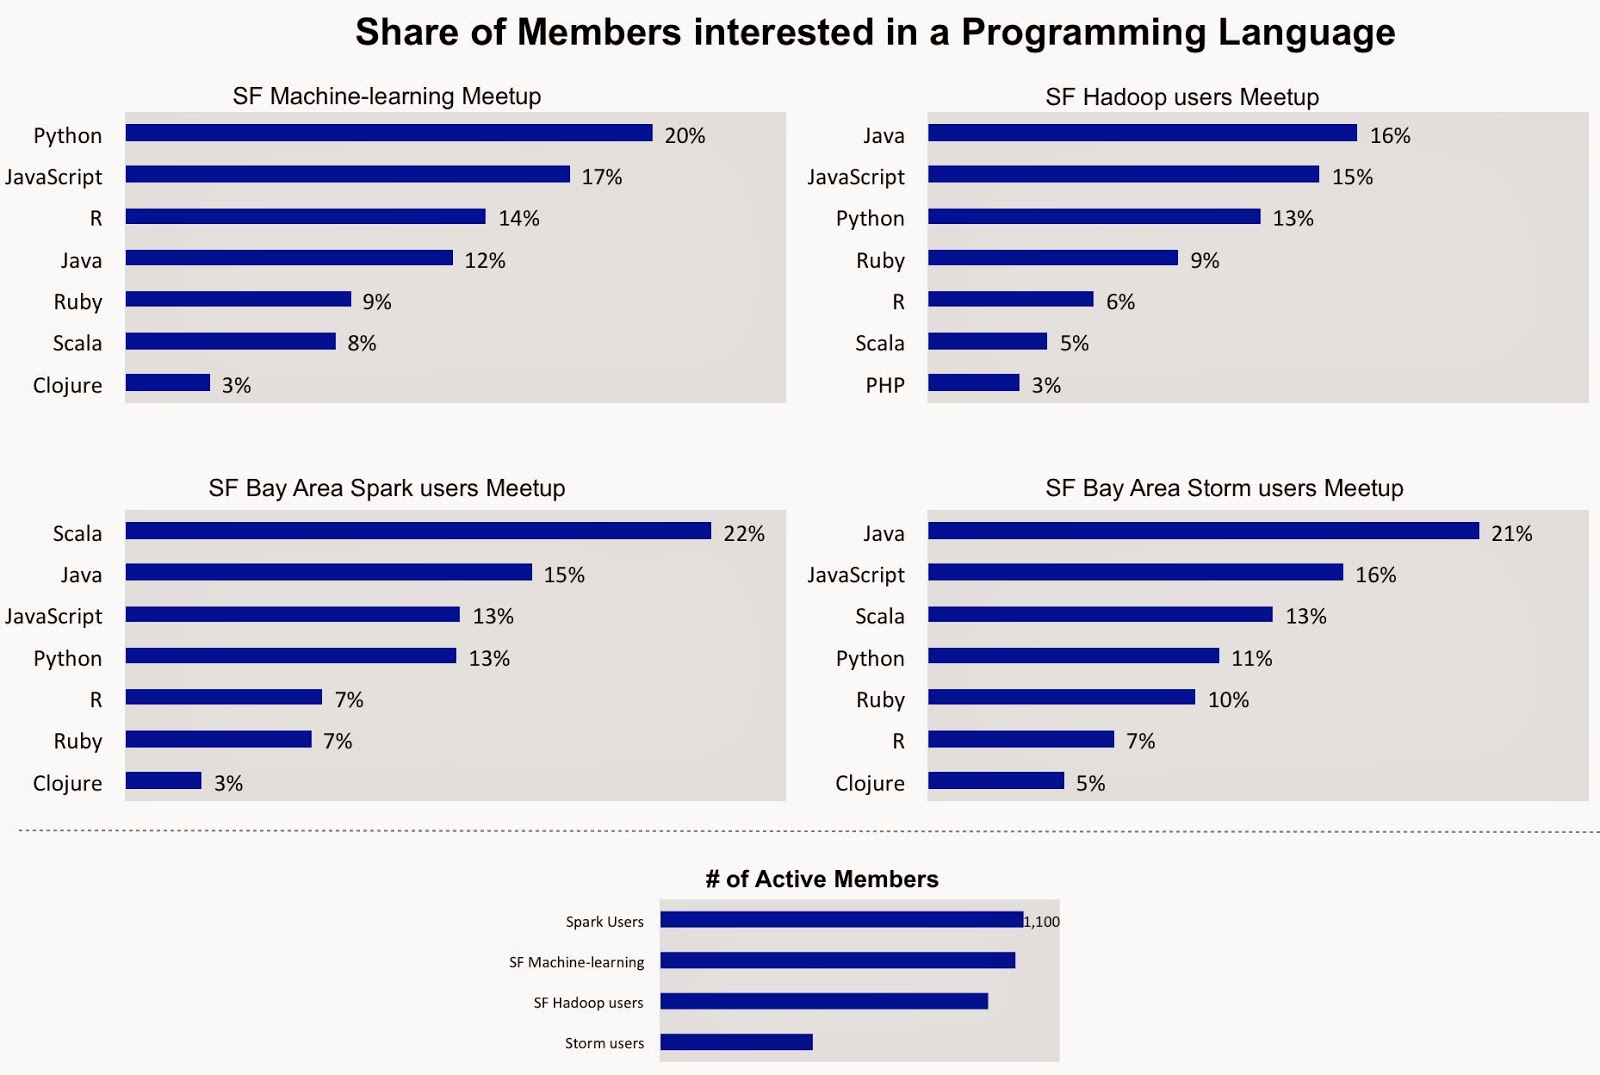 Popular programming languages for select Meetups